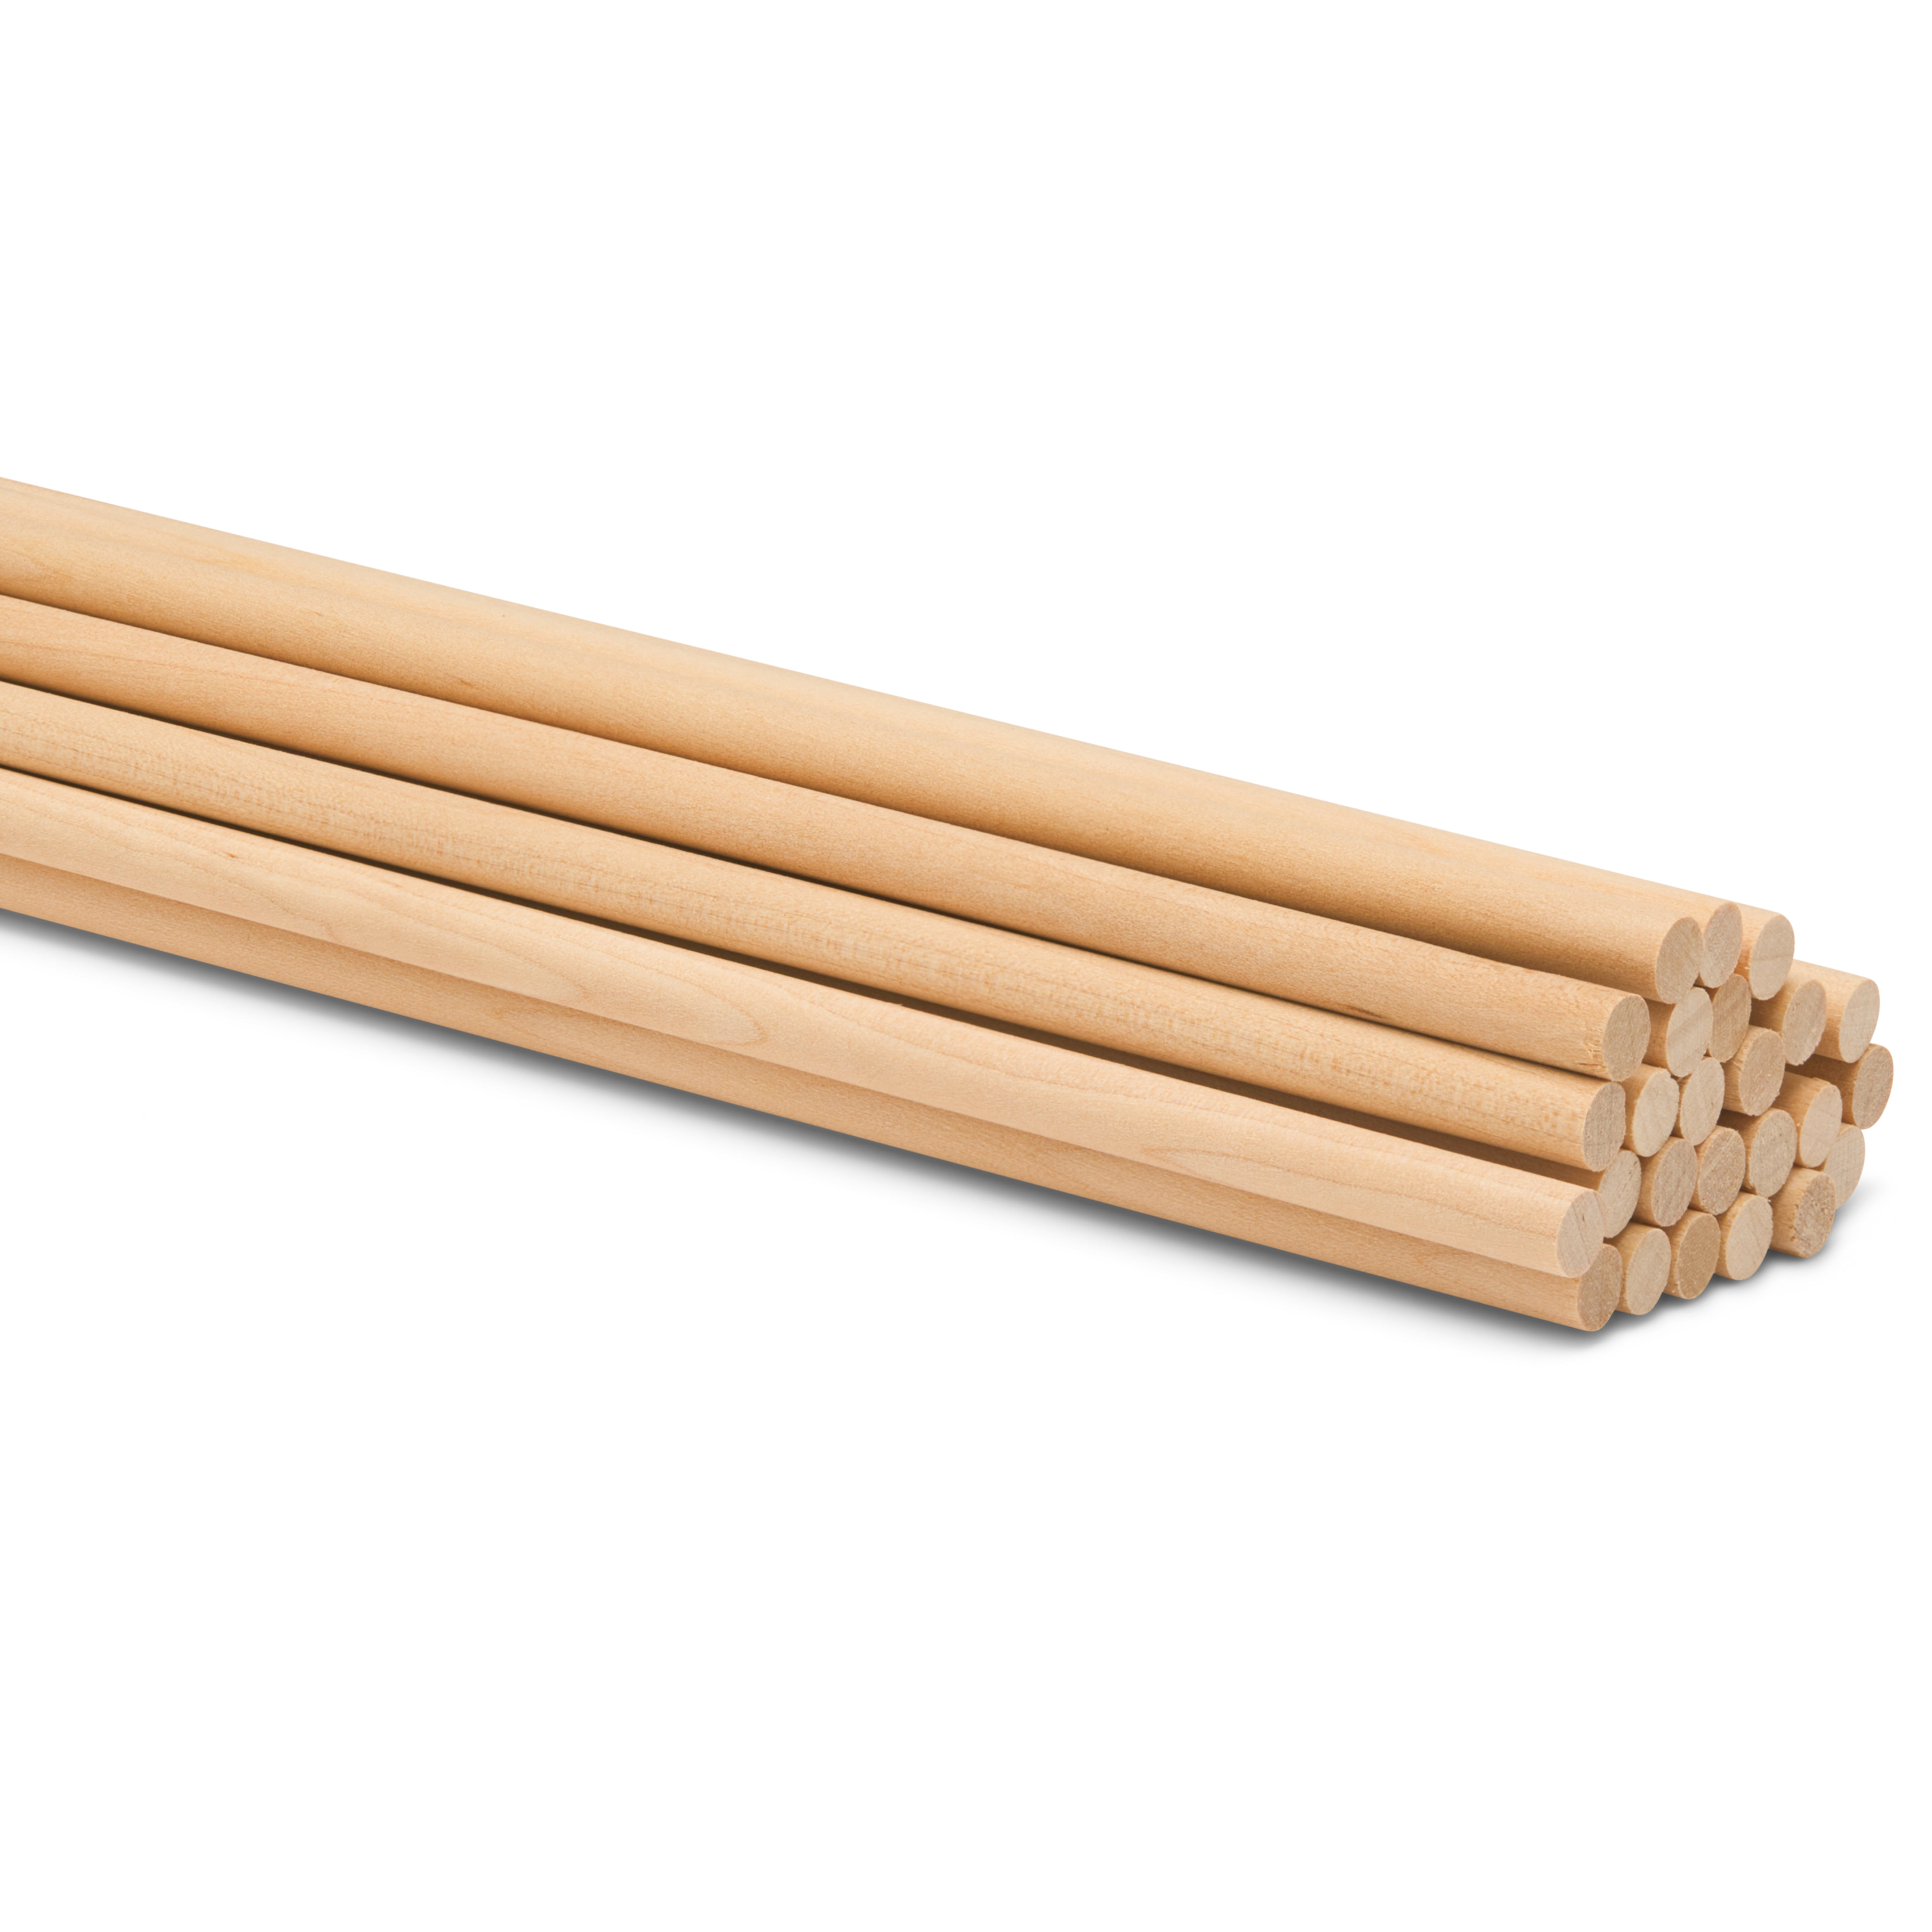 Dowel Rods Wood Sticks Wooden Dowel Rods - 1/4 x 24 Inch Unfinished  Hardwood Sticks - for Crafts and DIYers - 25 Pieces by Woodpeckers 